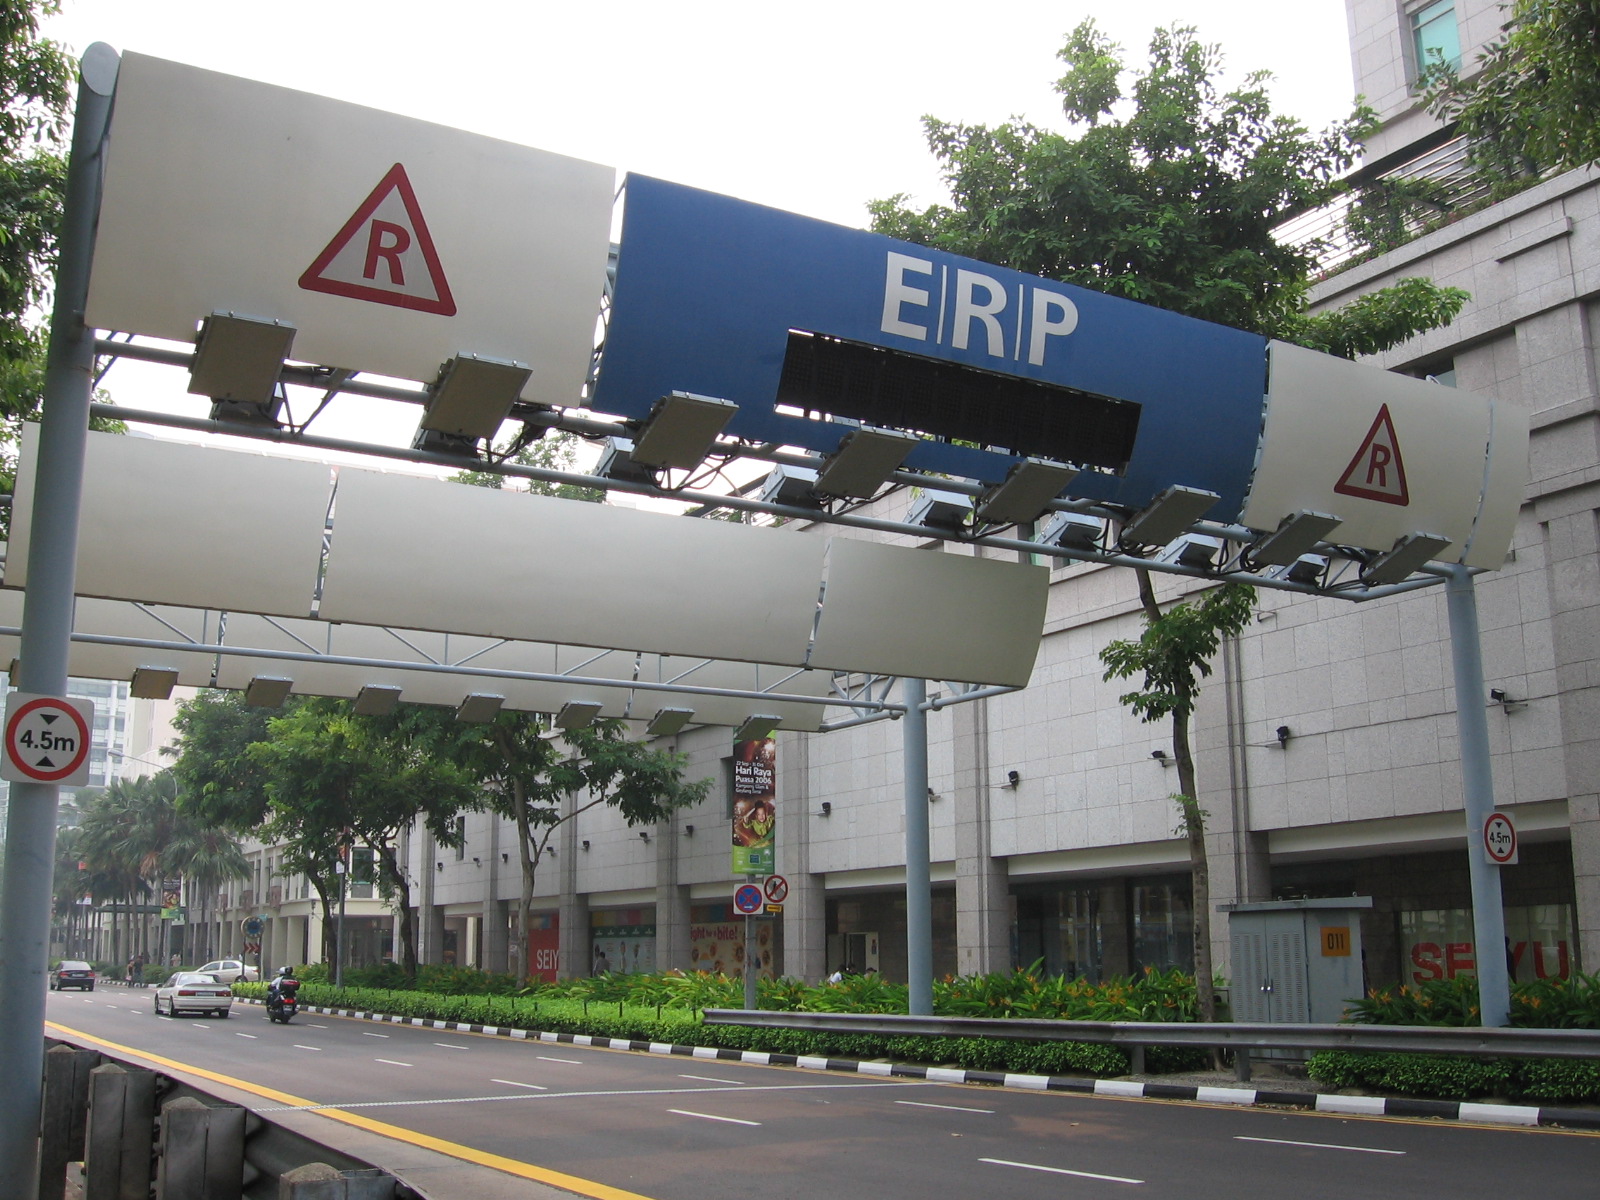 Electronic Road Pricing